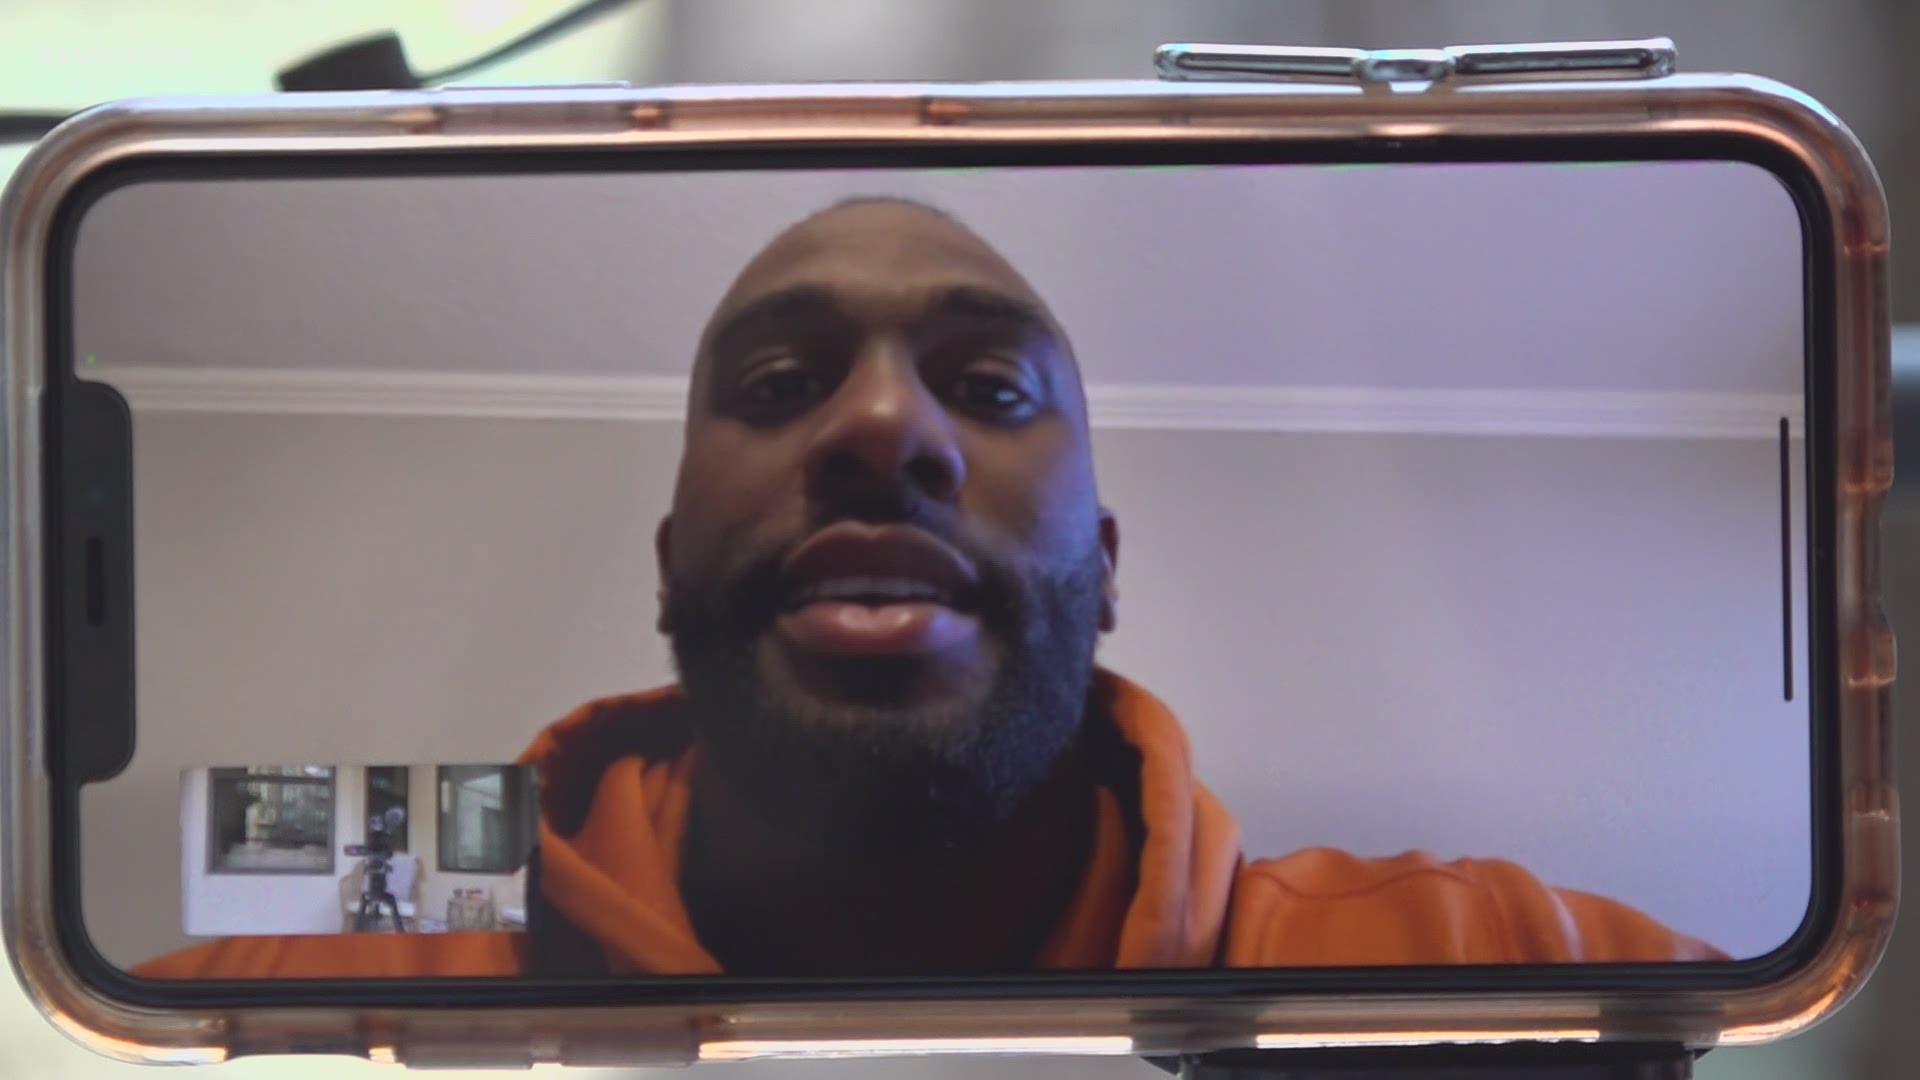 Alex Okafor will be making his Super Bowl debut after an injury in 2020. He talked to KVUE about getting a second chance.